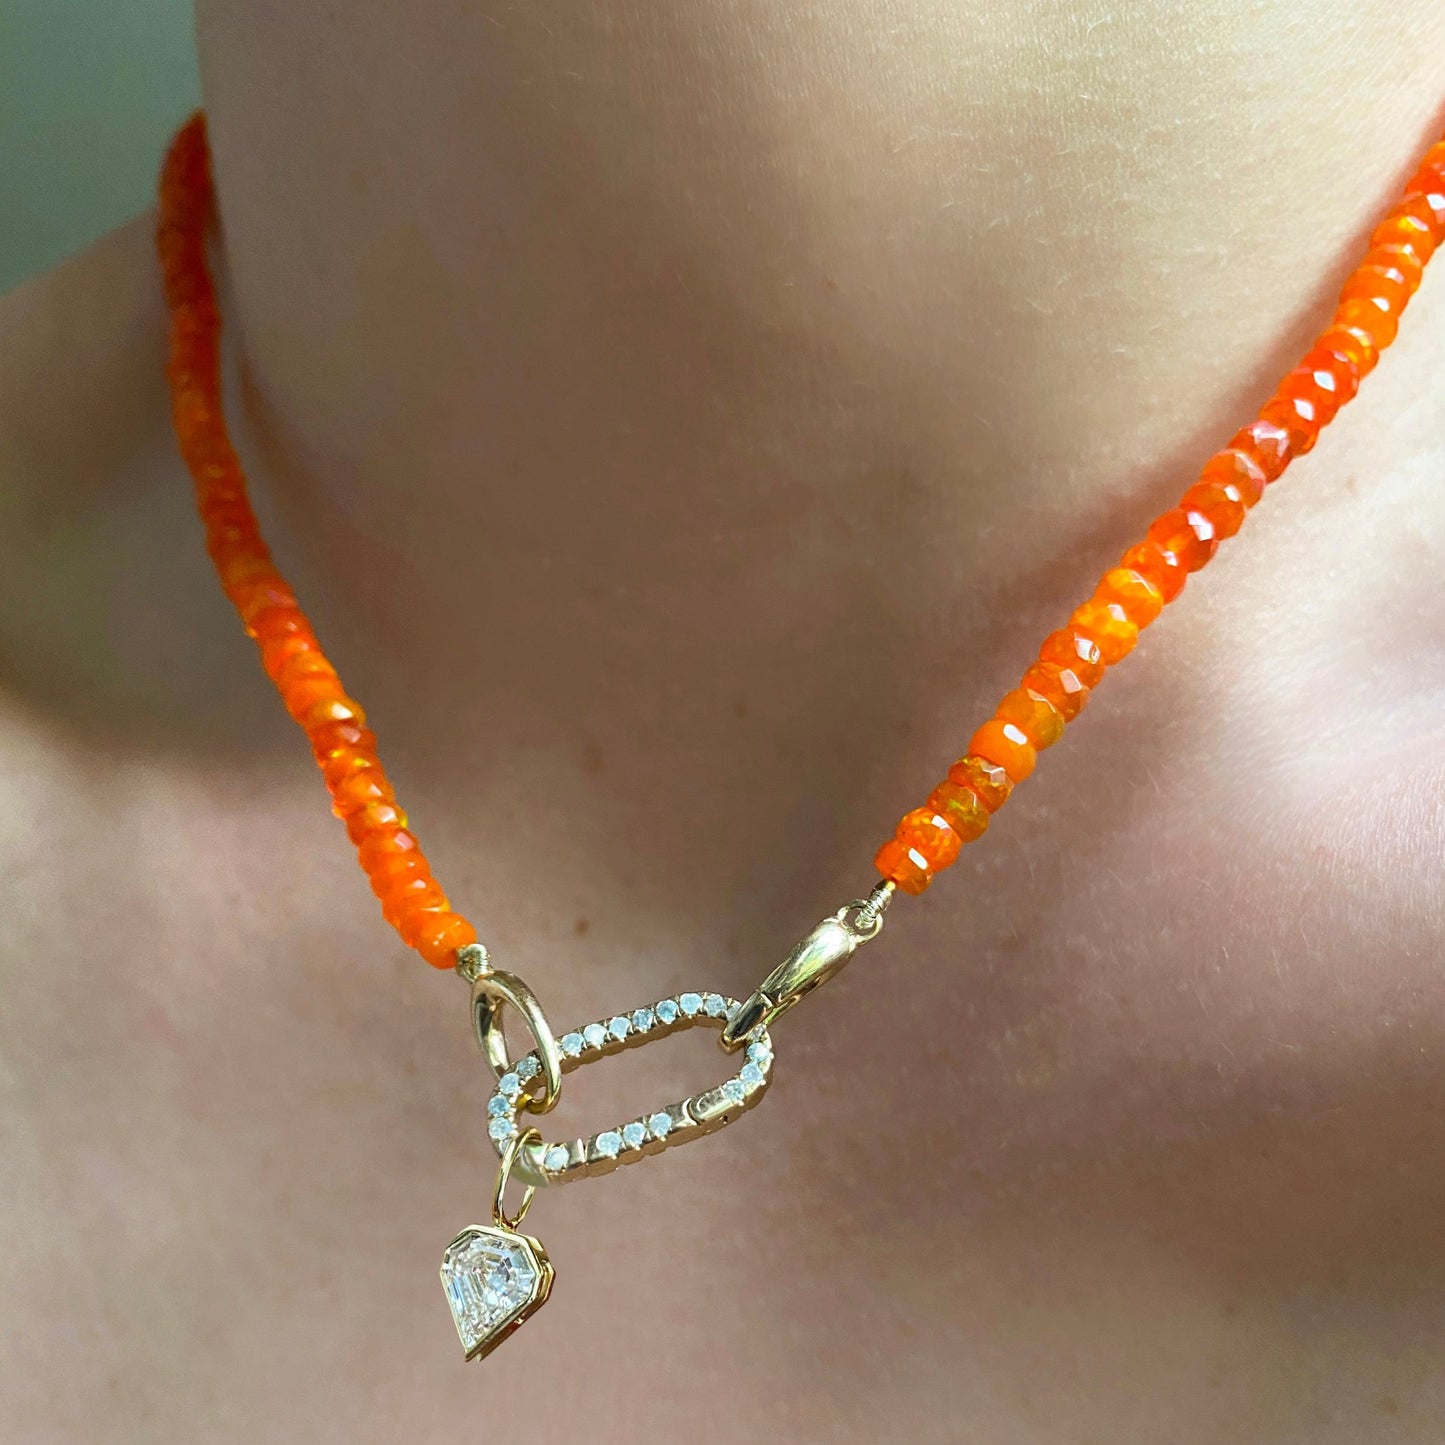 Shimmering beaded necklace made of faceted opals in shades of orange on a gold linking ovals clasp. Styled on a neck layered with a medium pave face charm lock and shield diamond solitaire charm. 